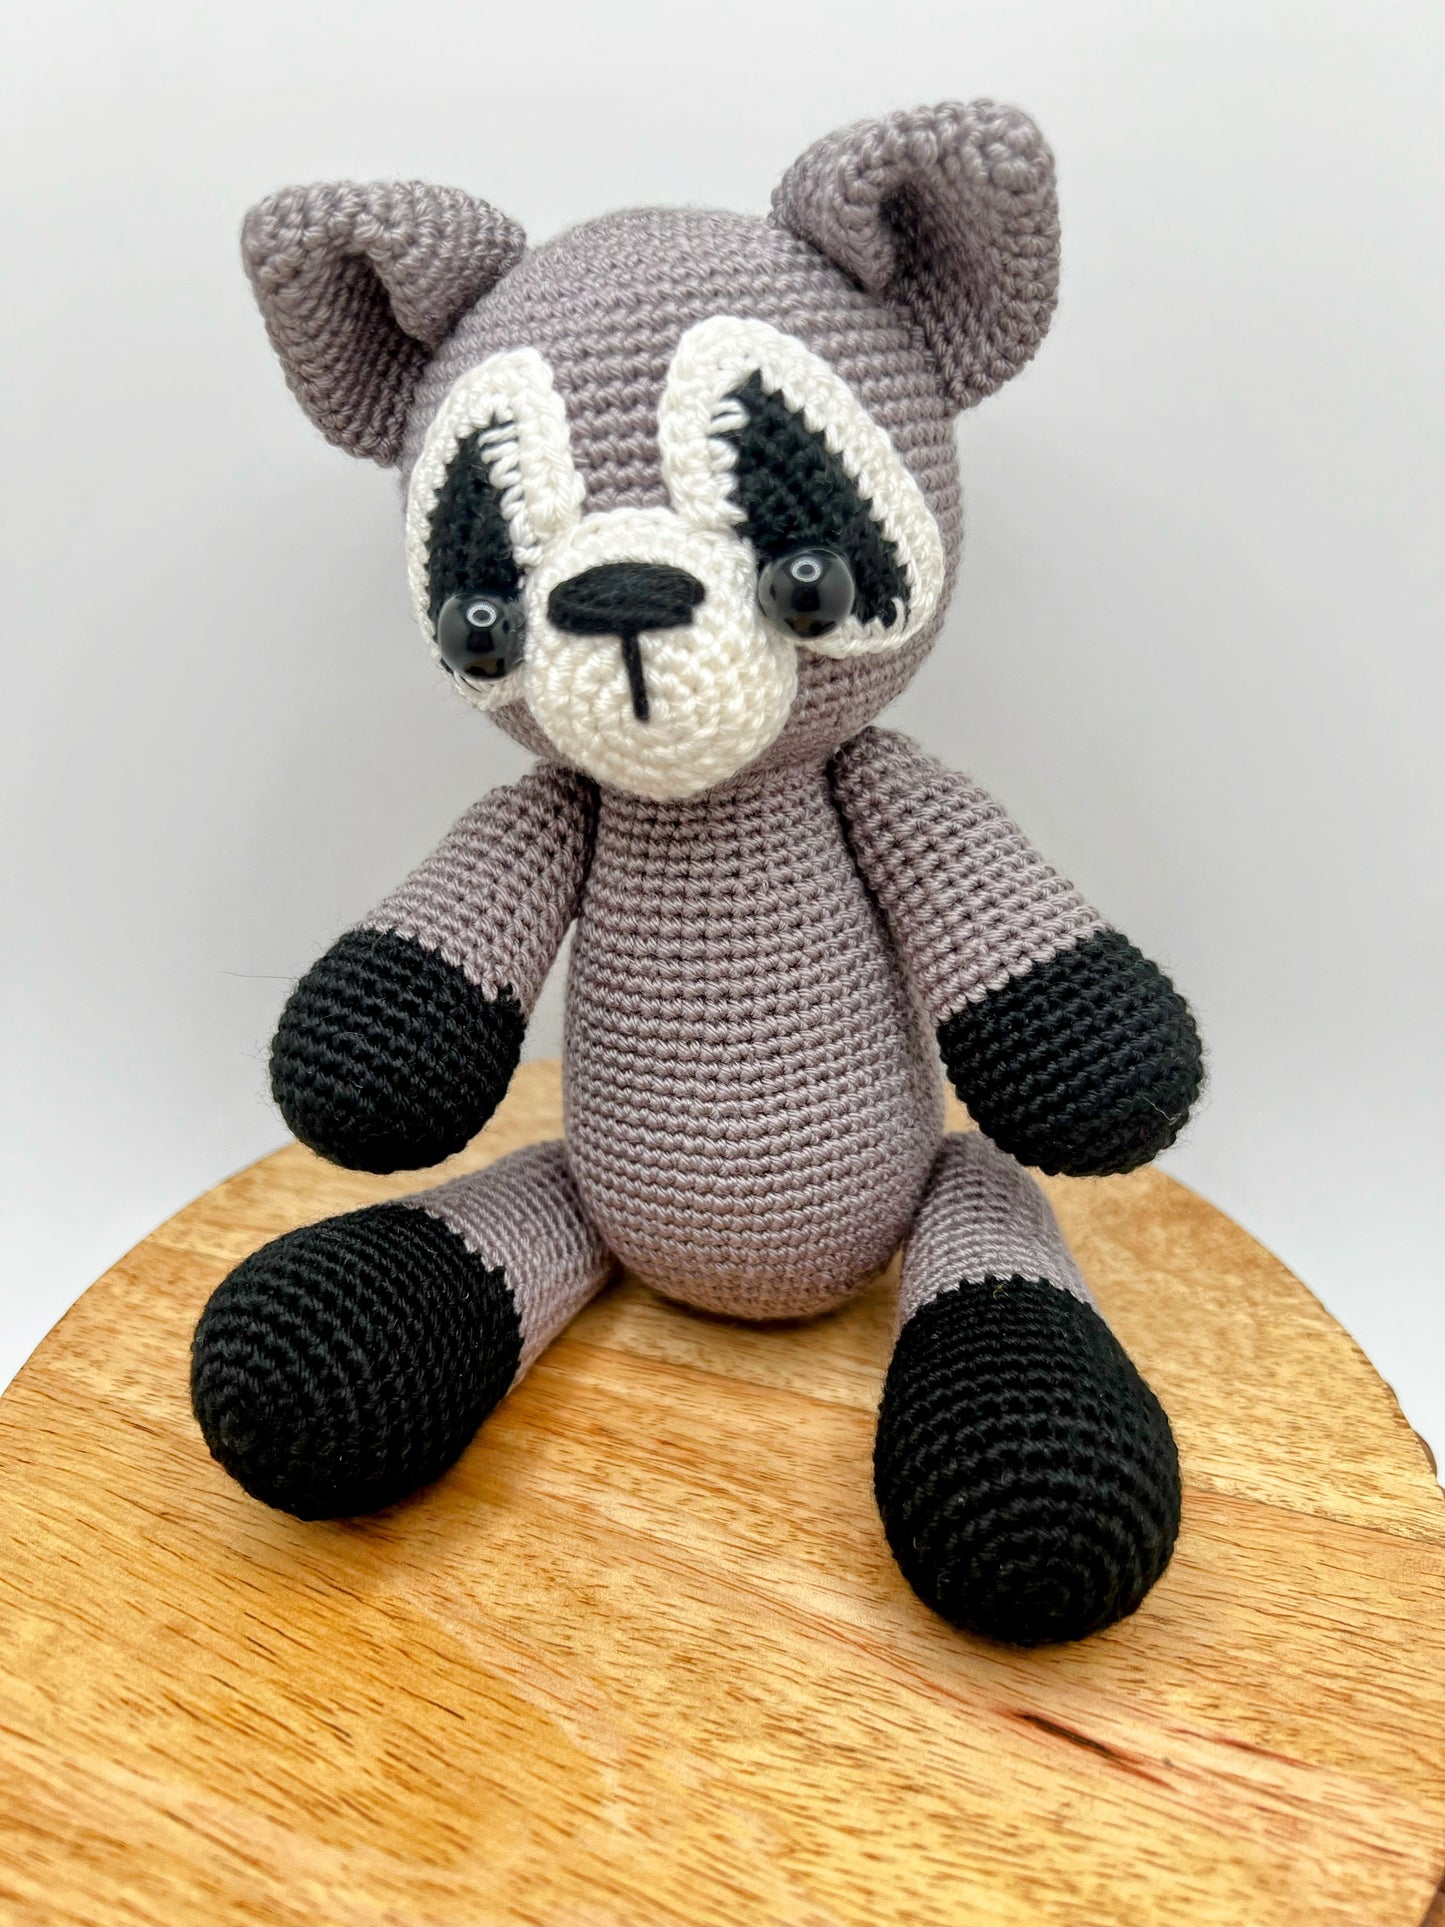 Stuffed Raccoon Toy With Moving Legs - Crochet Knitted Amigurumi Toy